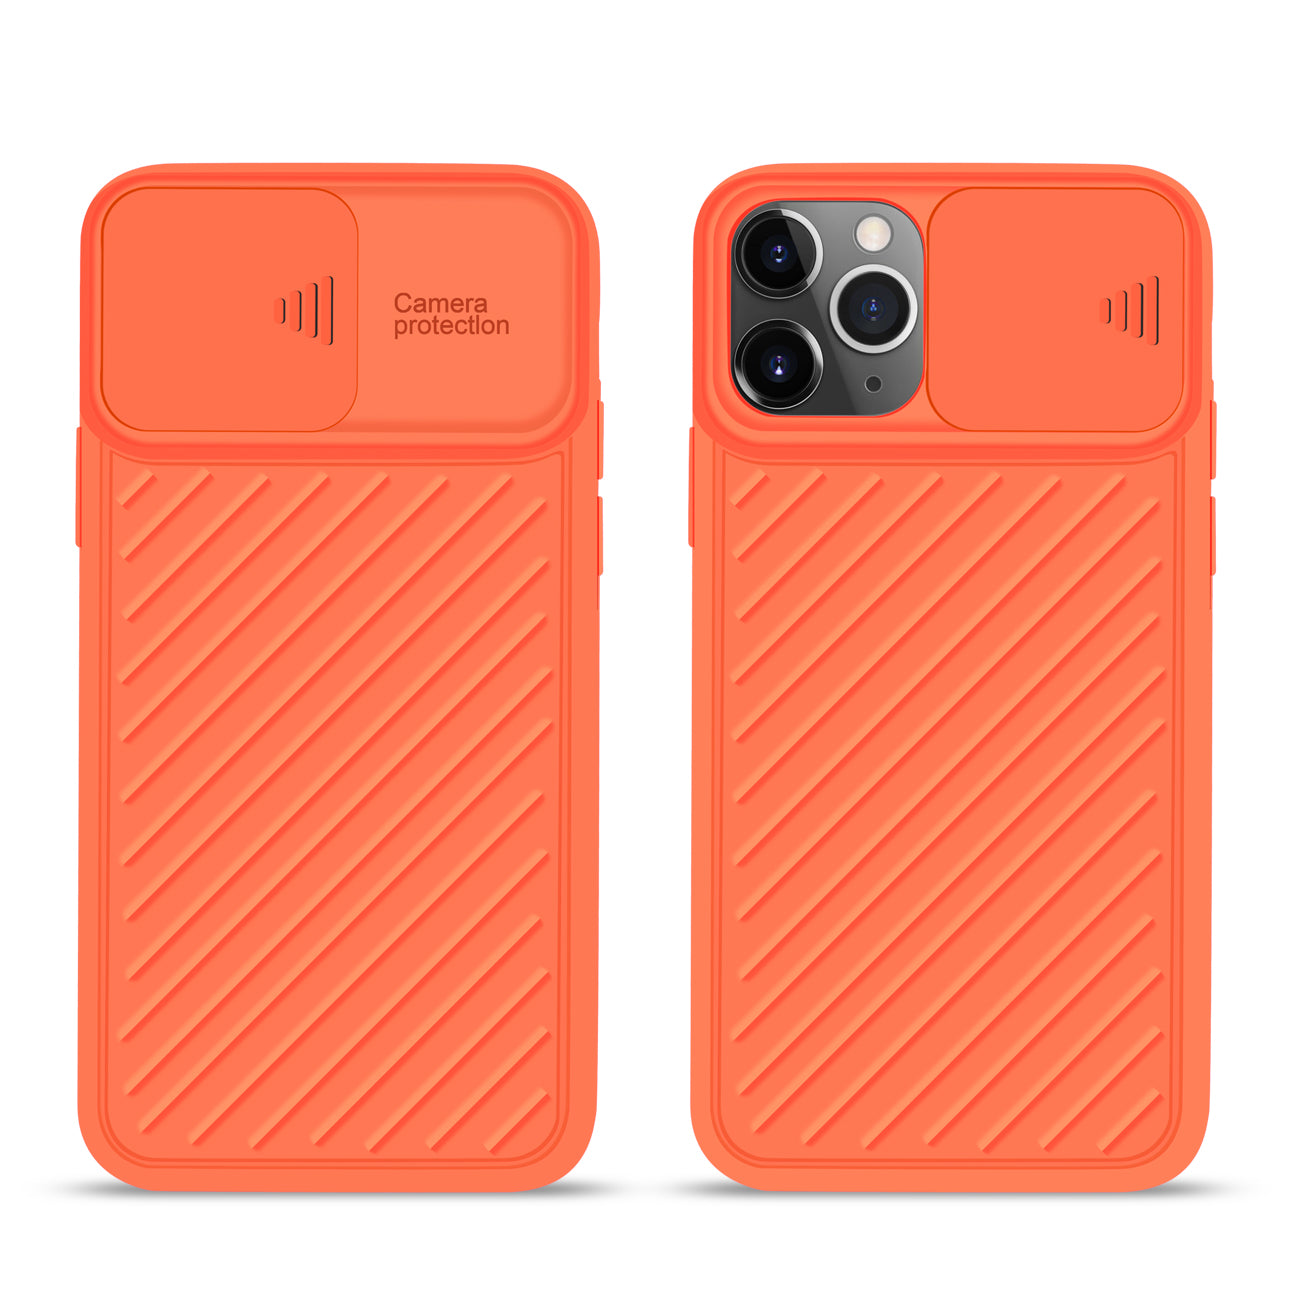 Camshield Series Case With Slide Camera CoverTpu Case For APPLE IPHONE 11 PRO MAX In Orange